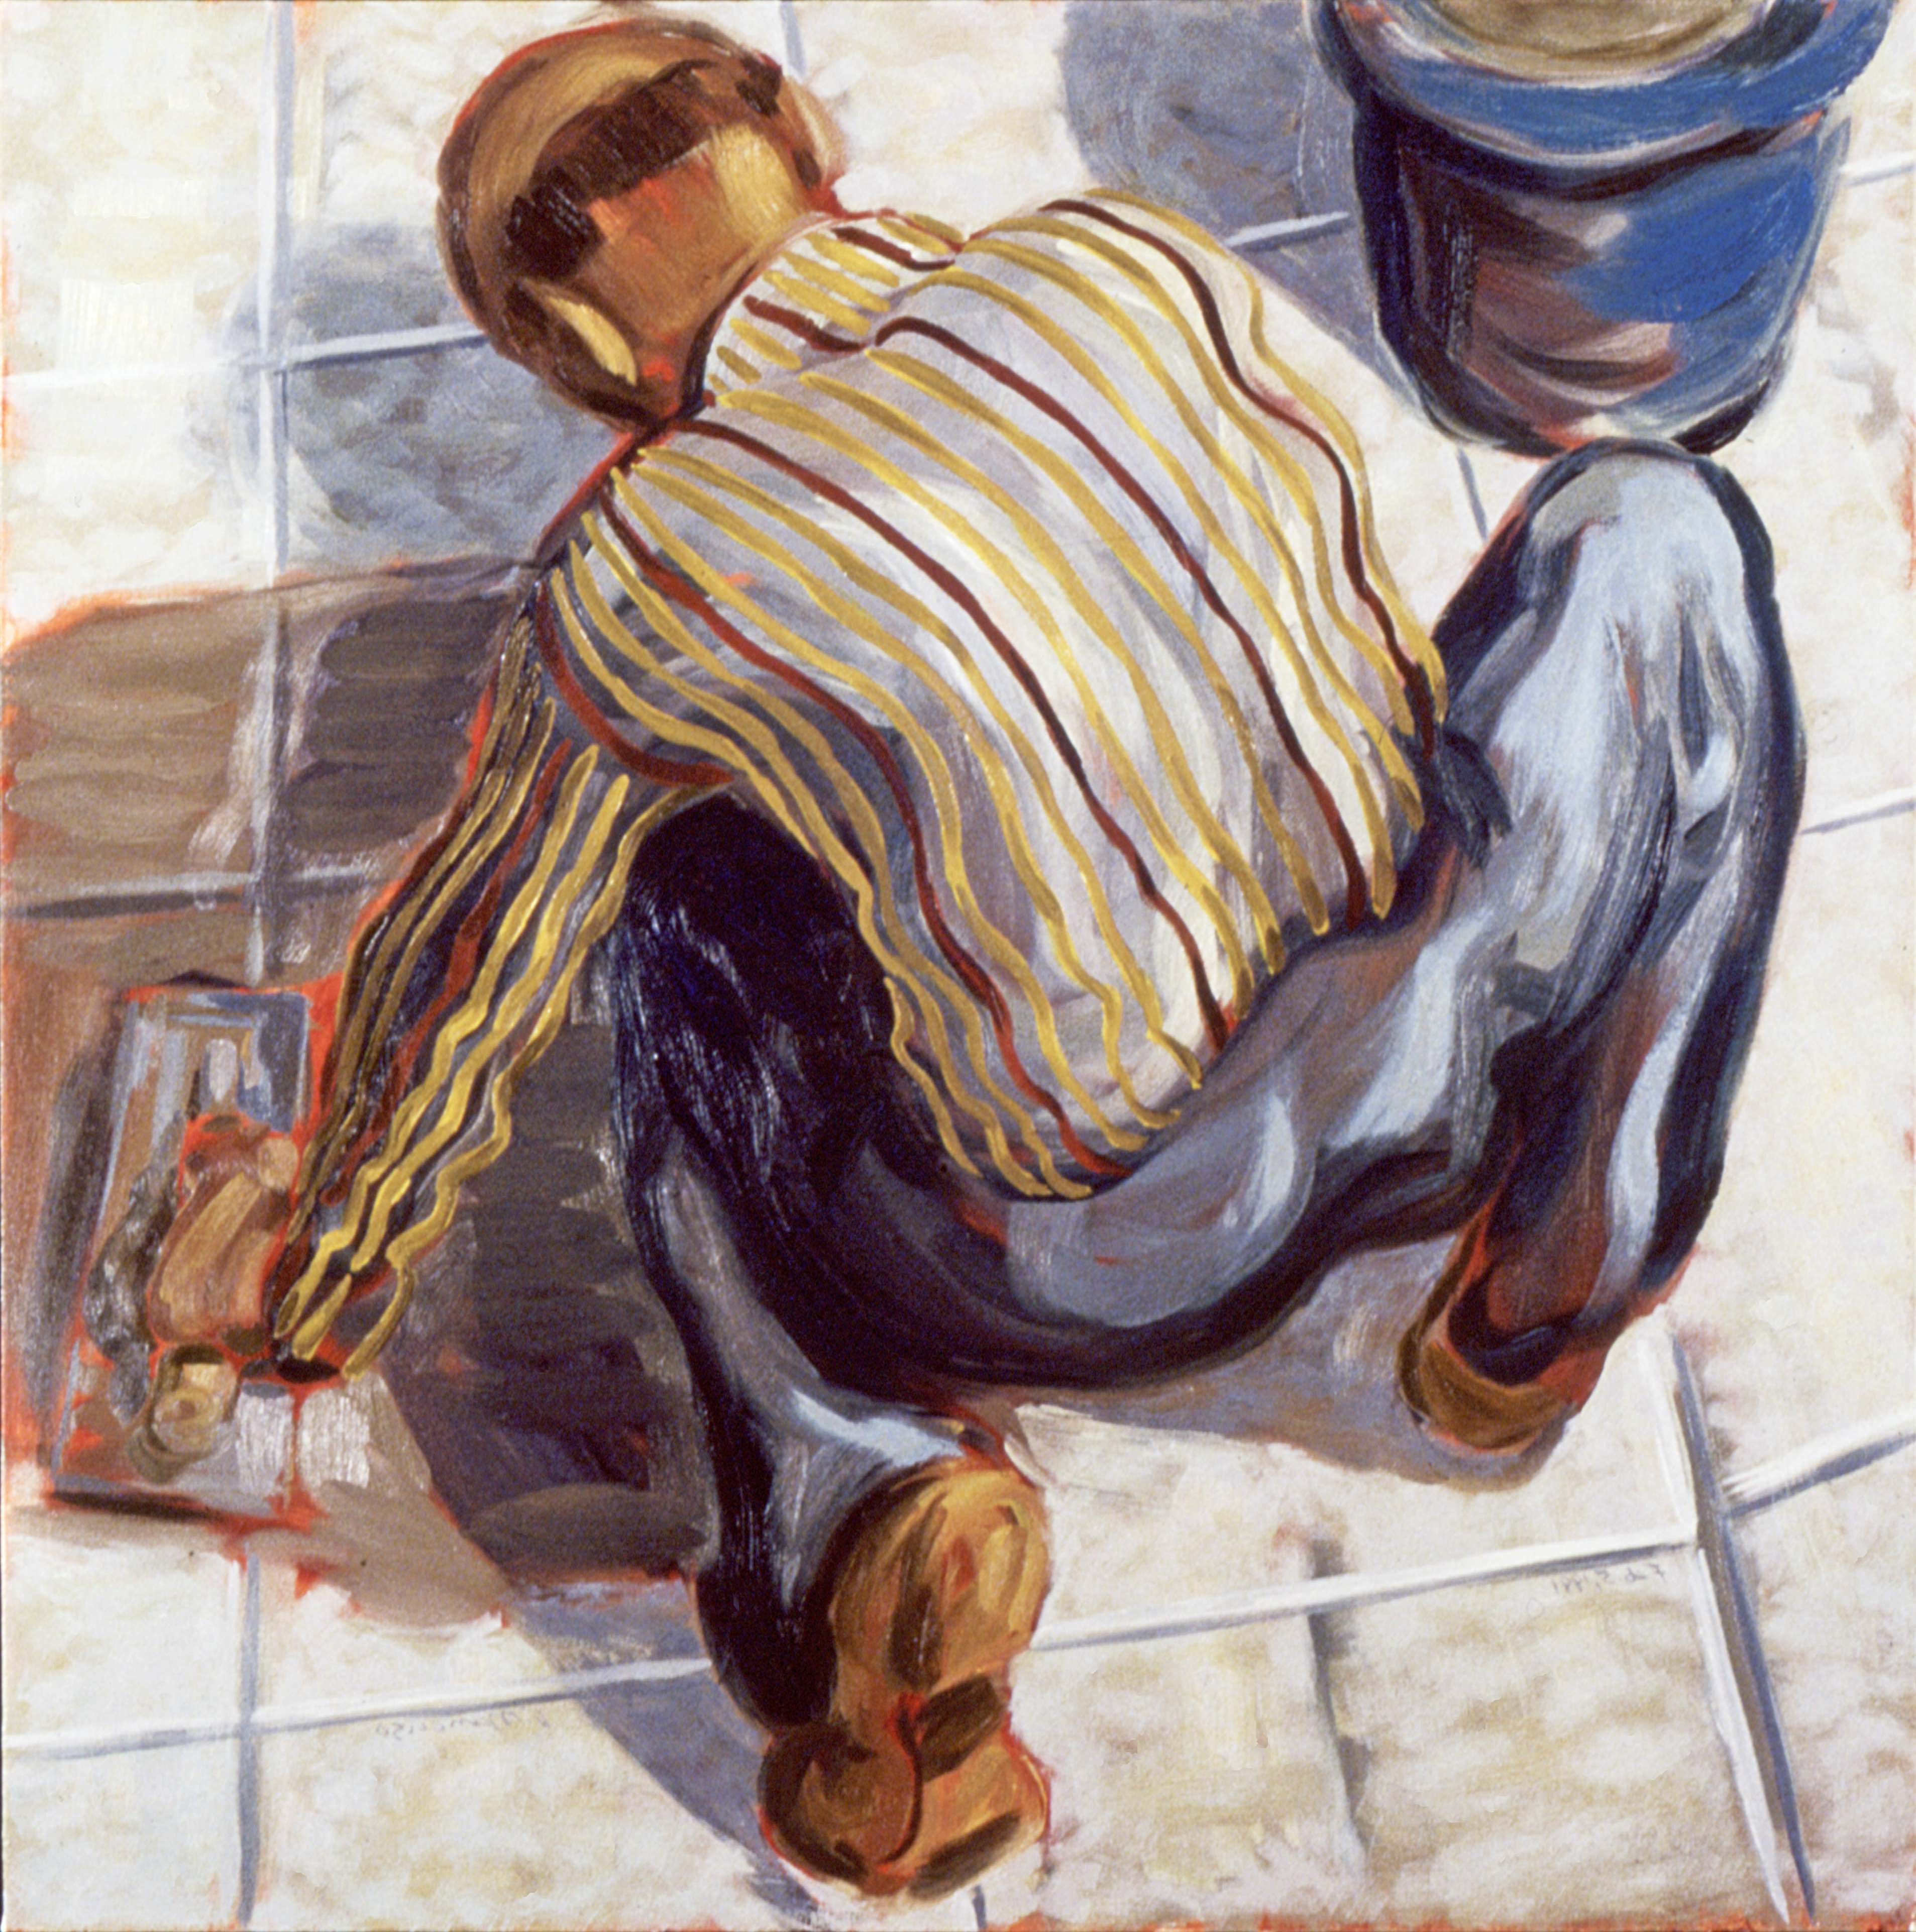 WORK IS THE CONDITION FOR EQUALITY #1, painted by Vince Mancuso in 1991, oil on canvas 4x5 feet